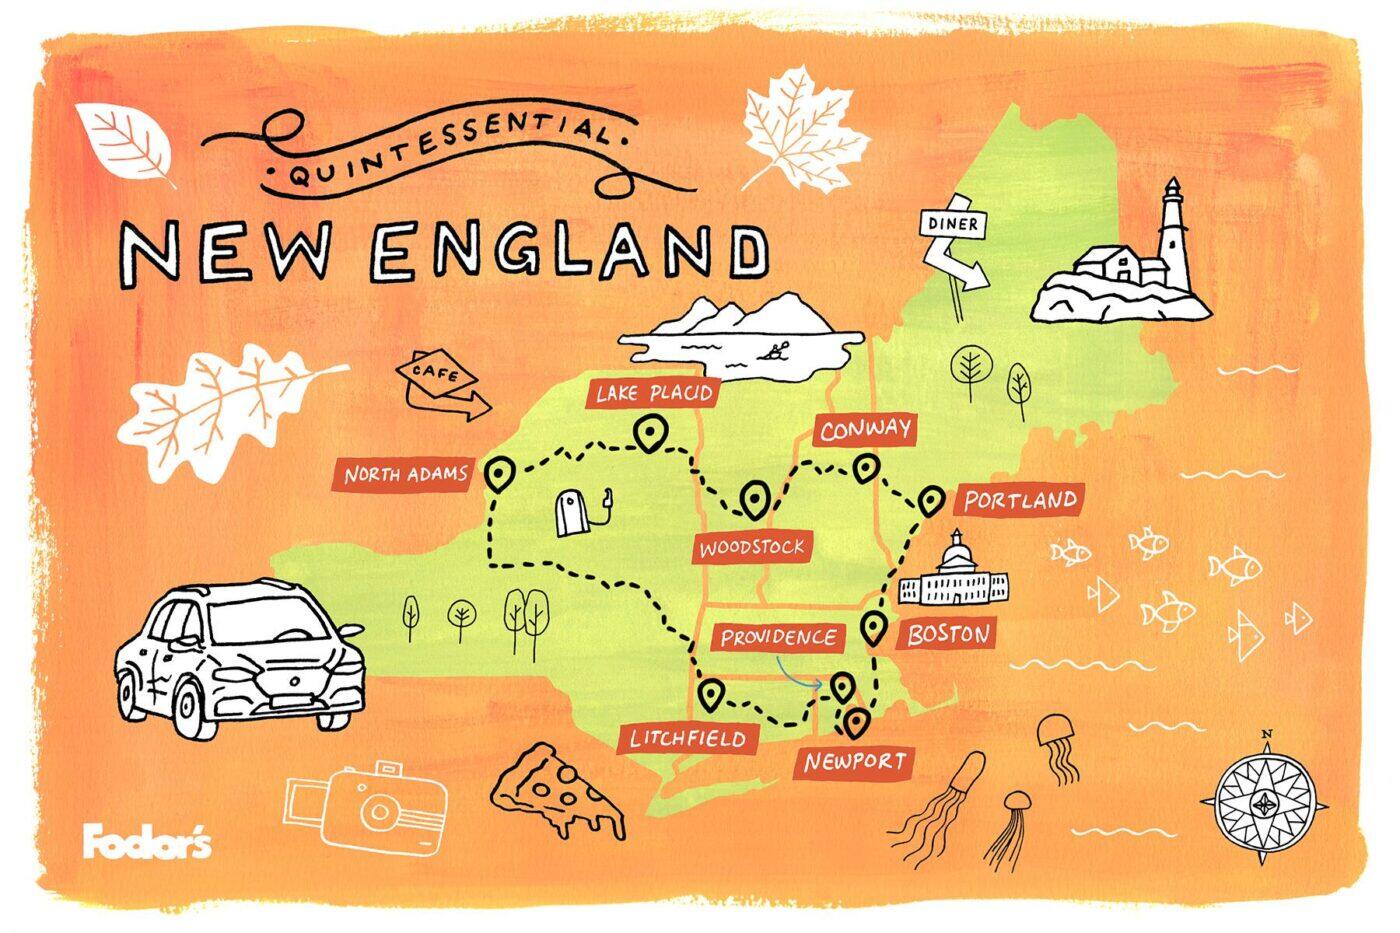 tour of new england road trip